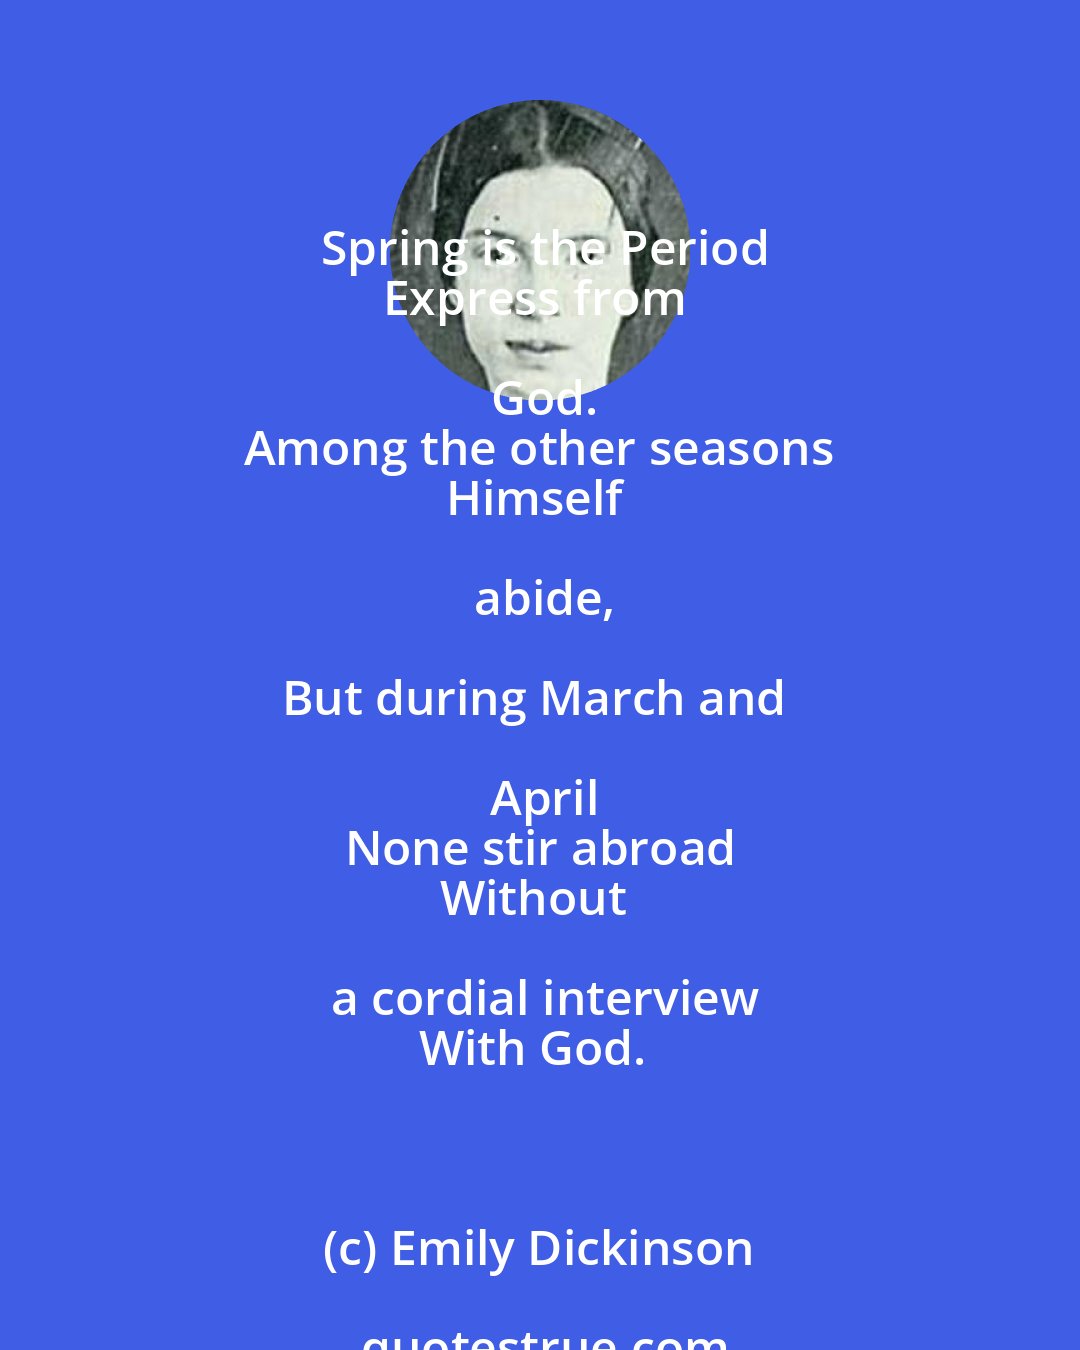 Emily Dickinson: Spring is the Period
Express from God.
Among the other seasons
Himself abide,

But during March and April
None stir abroad
Without a cordial interview
With God.